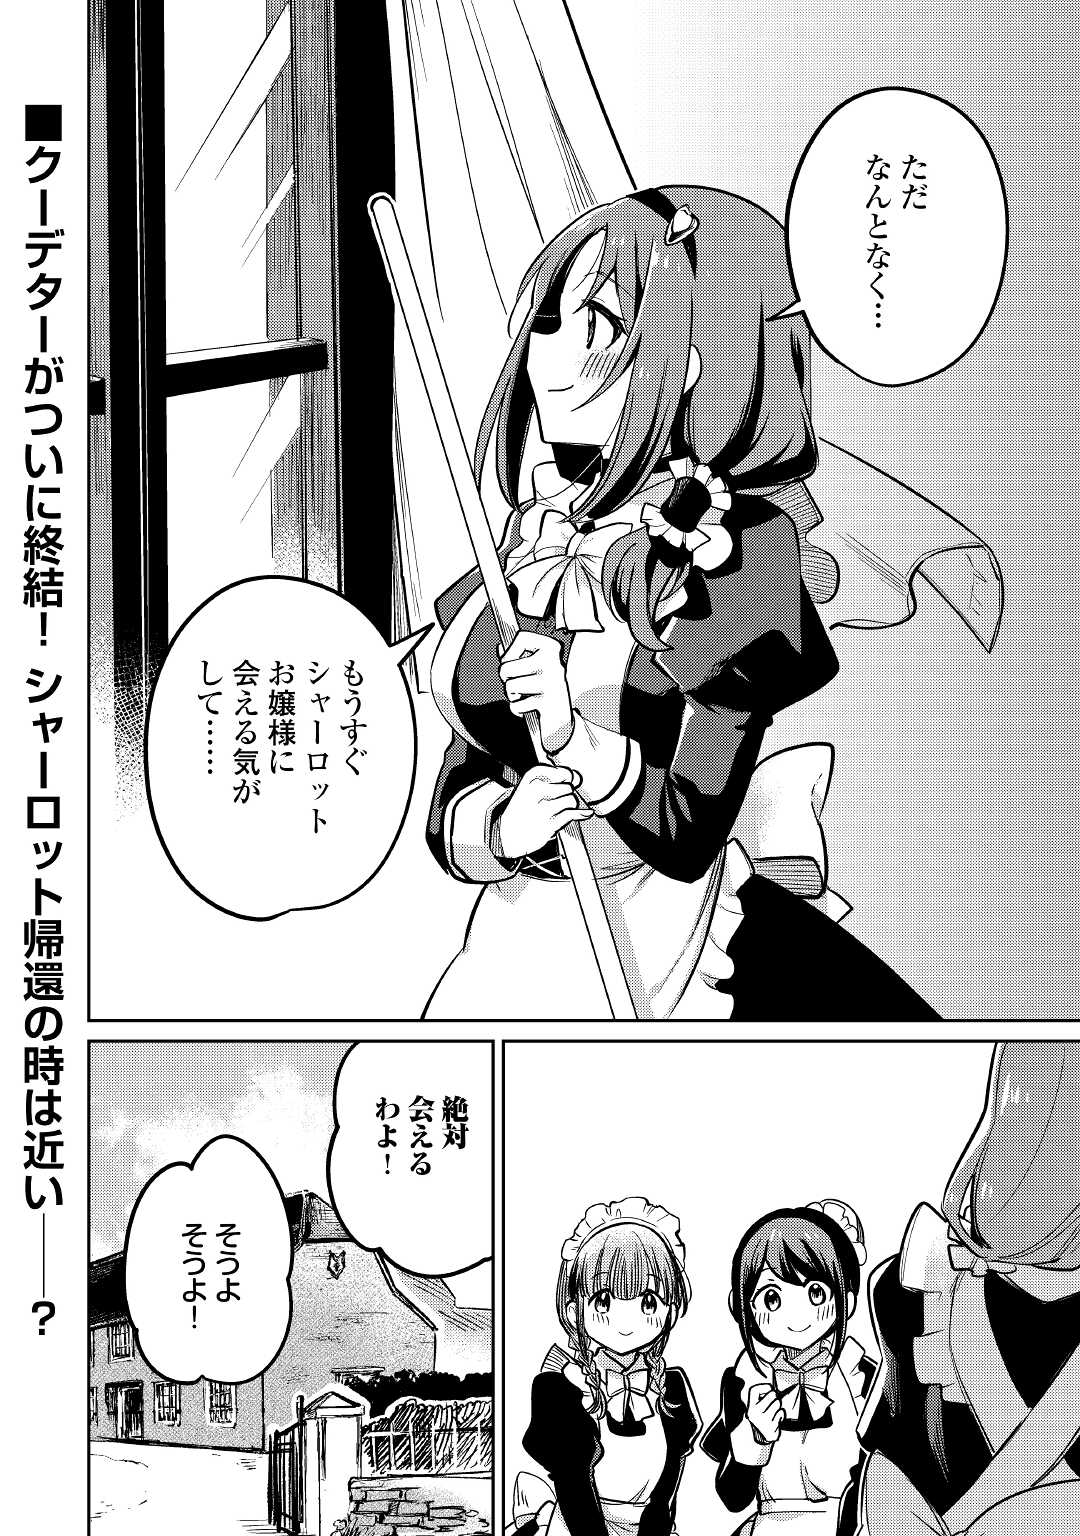 The Former Structural Researcher’s Story of Otherworldly Adventure 第40話 - Page 32